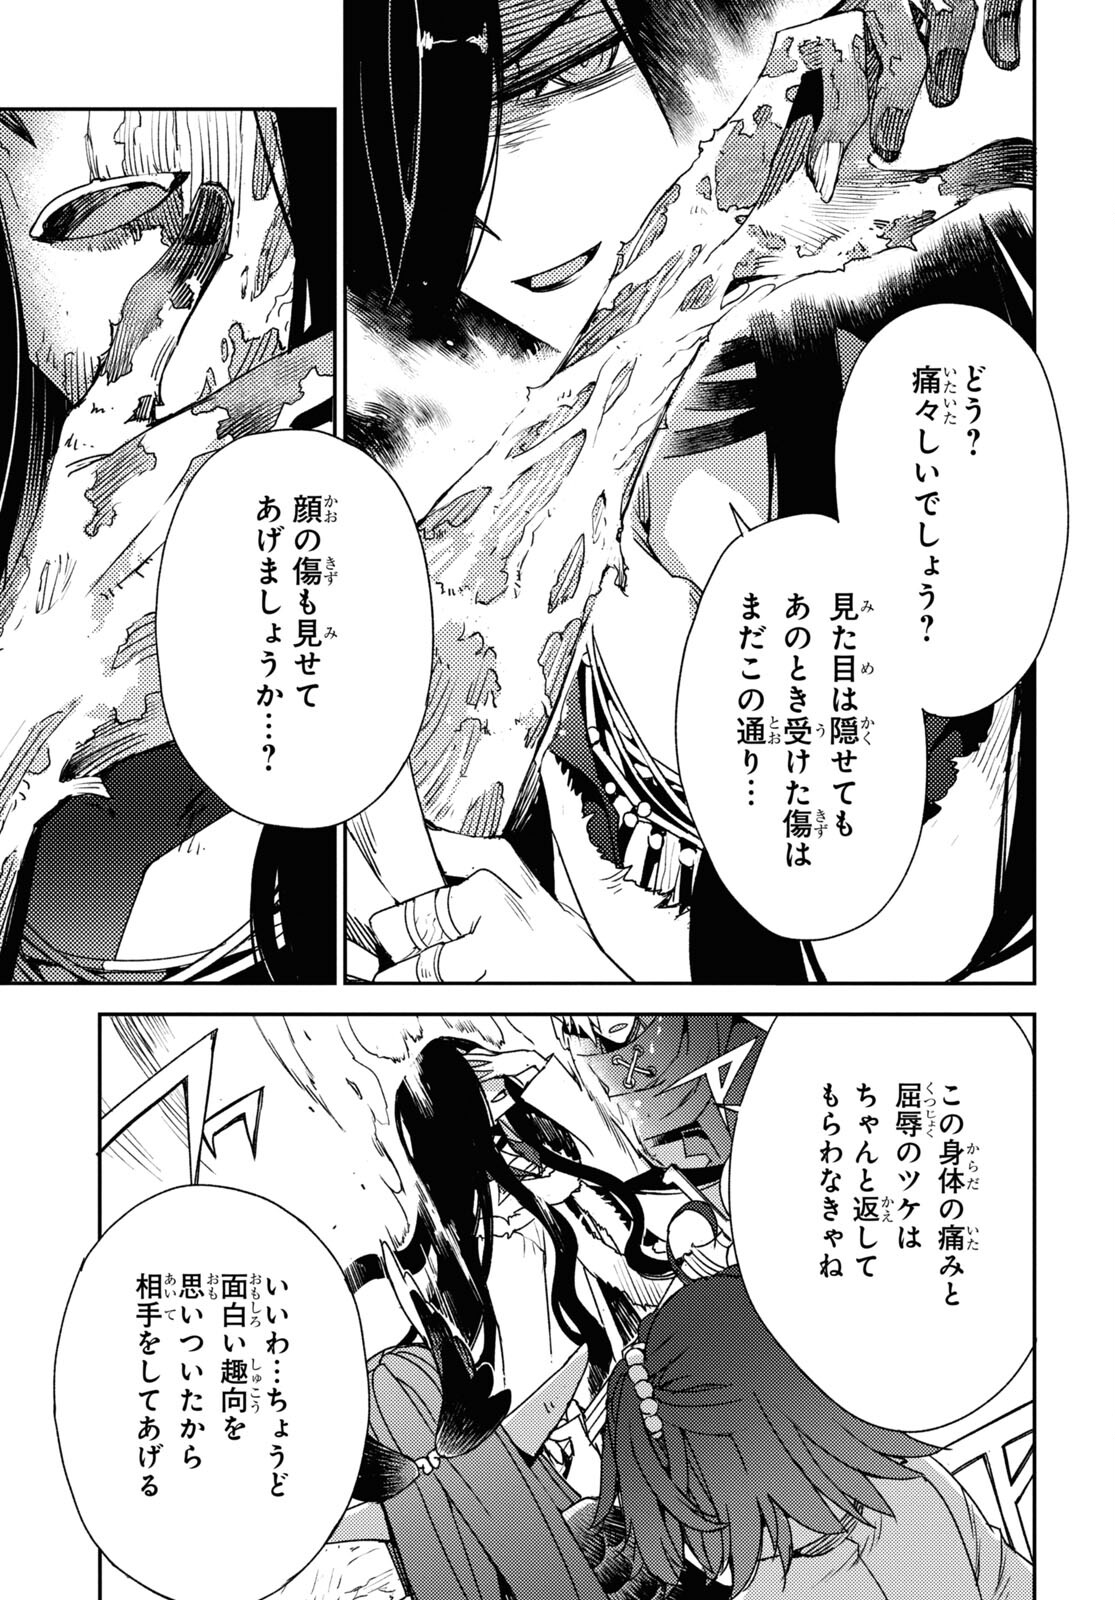 Fate/Grand Order -Epic of Remnant- 亜種特異点IV 禁忌降臨庭園 セイレム 異端なるセイレム 第38話 - Page 7